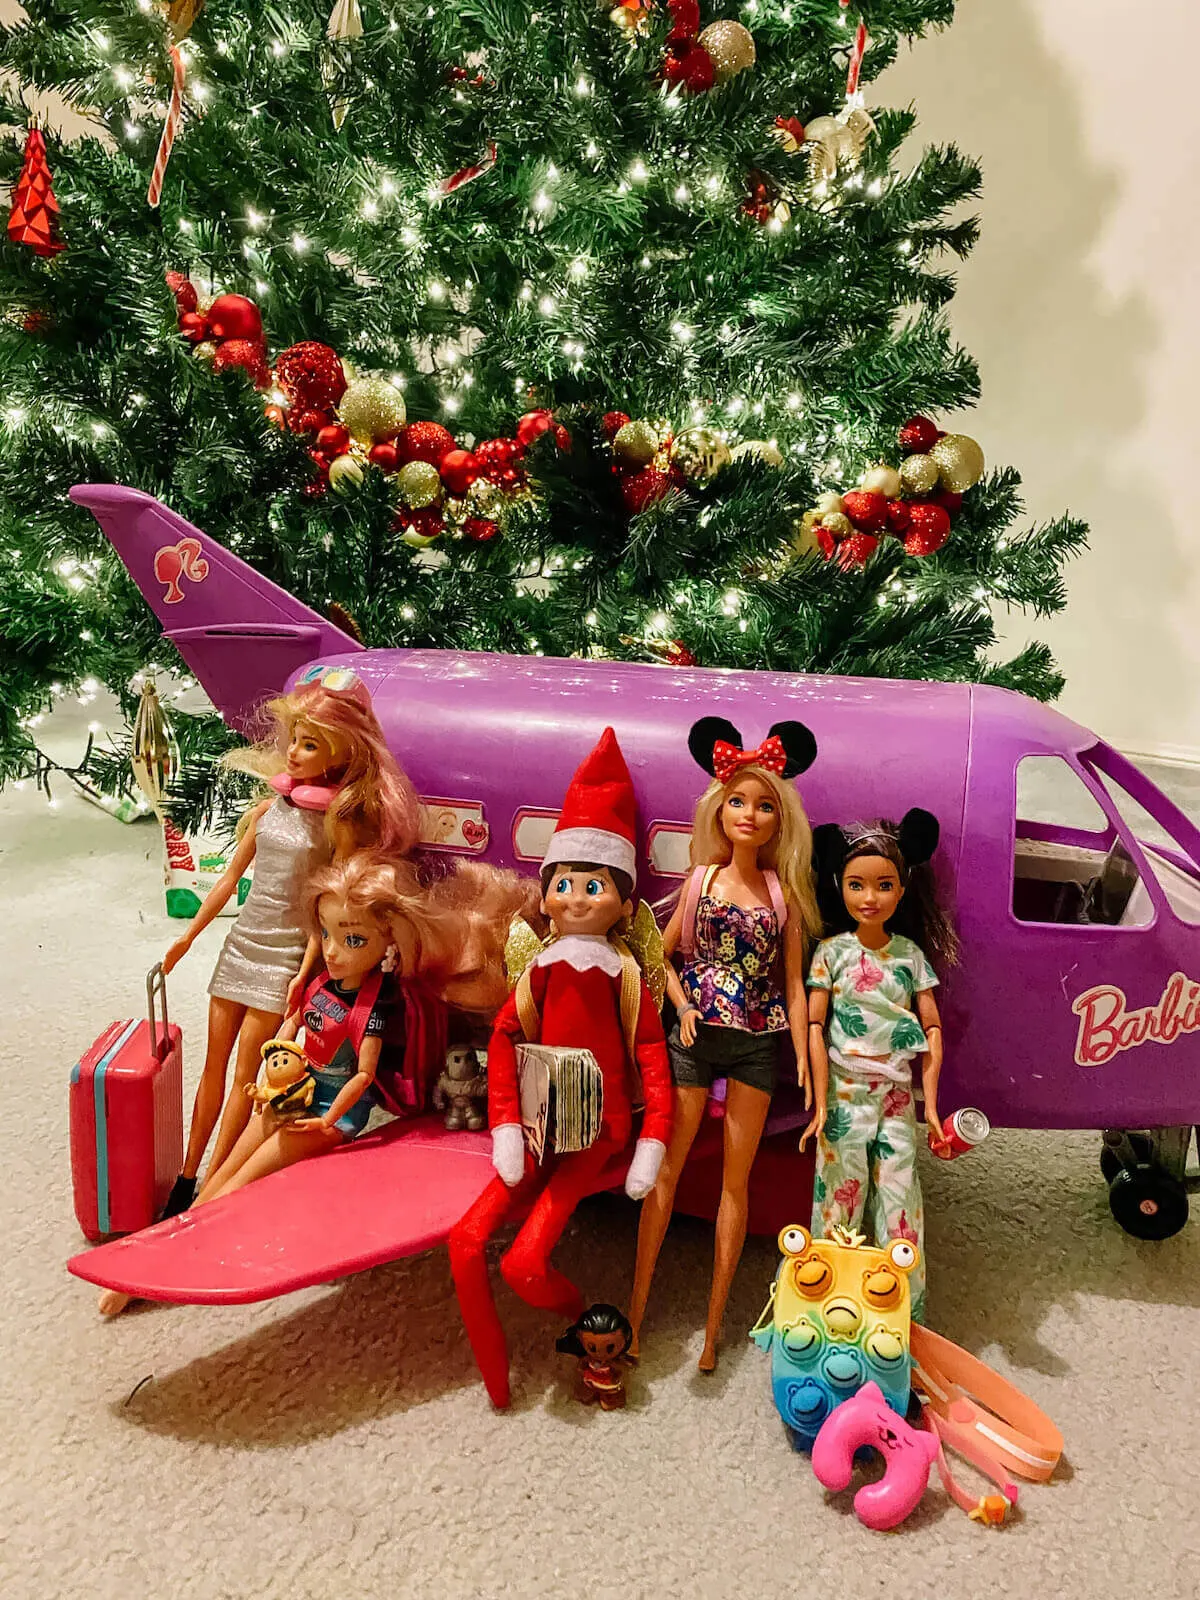 elf on the shelf going on holidays with barbies in front of barbie plane